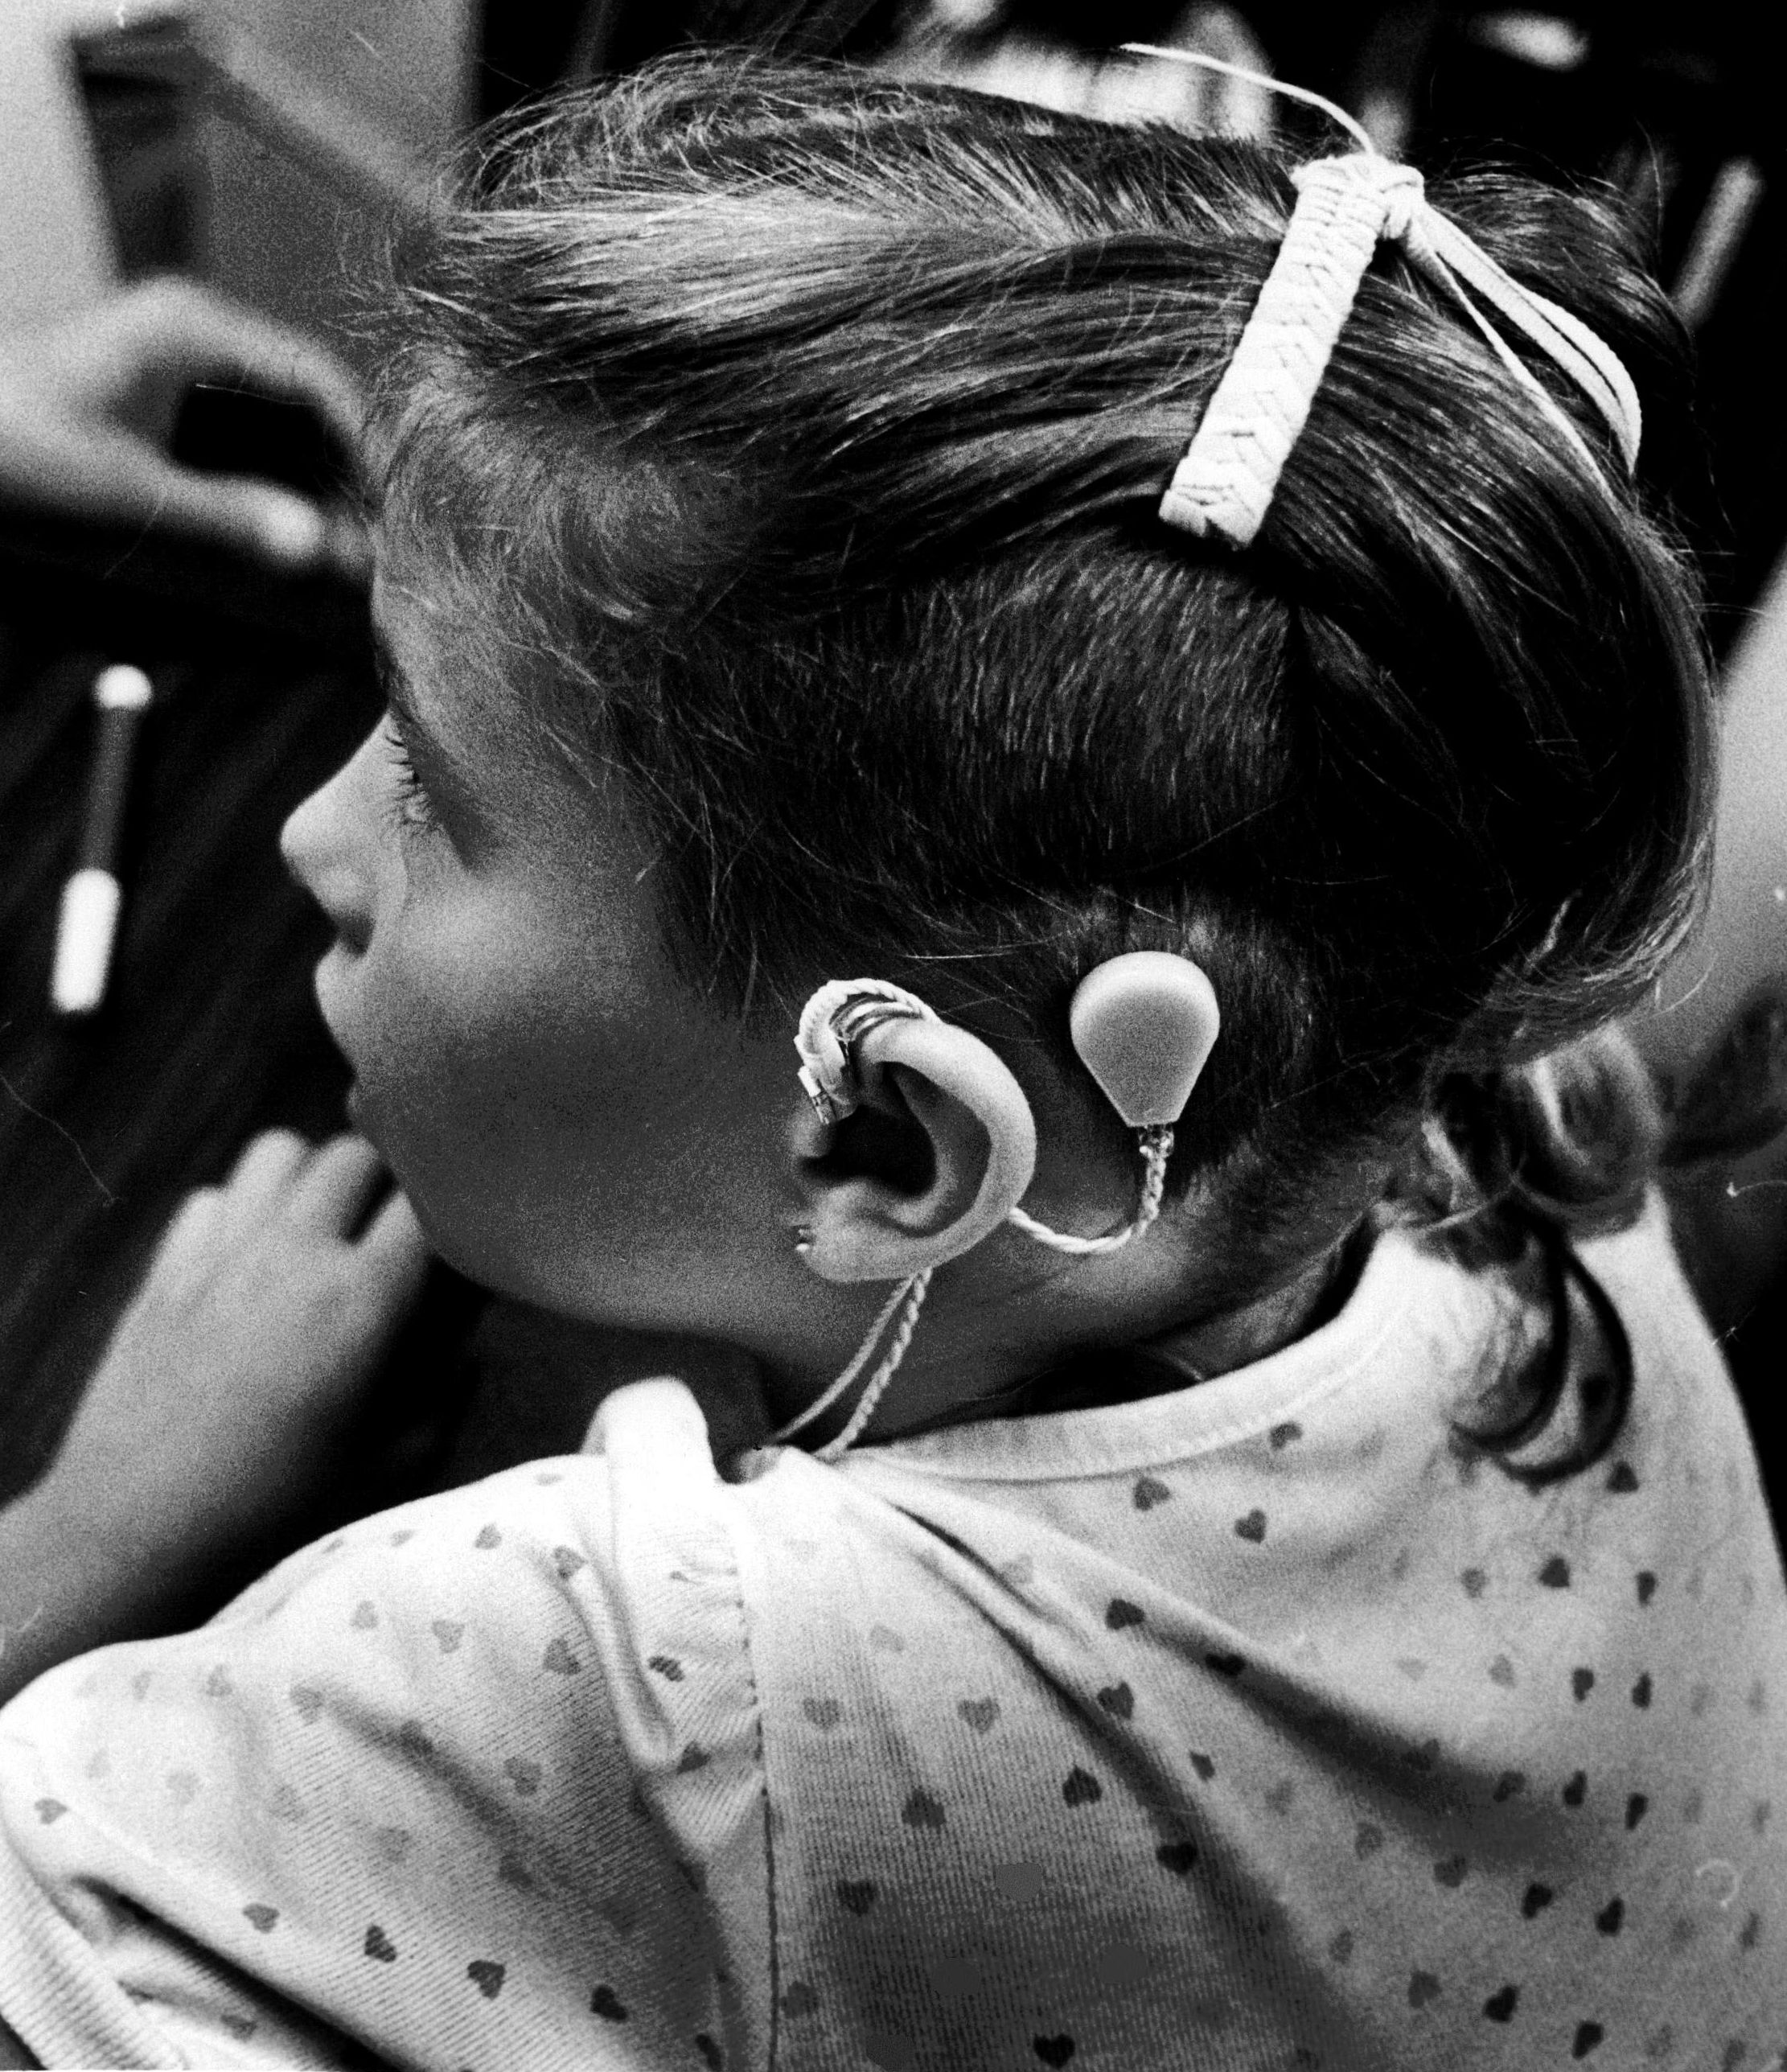 A child with an early cochlear implant on Aug. 24, 1984.